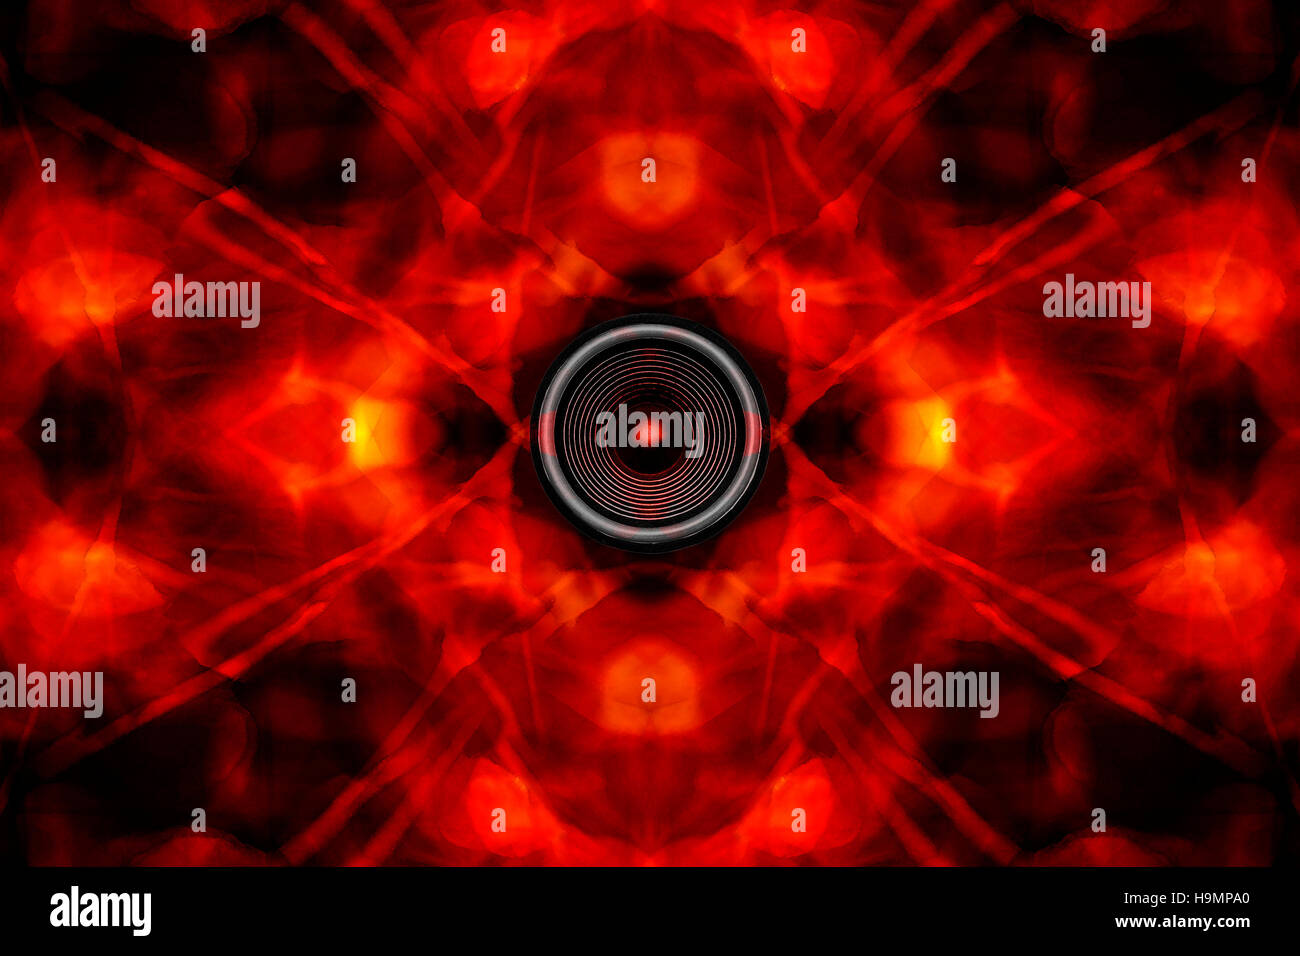 Music speaker on a groovy red kaleidoscope background Stock Photo